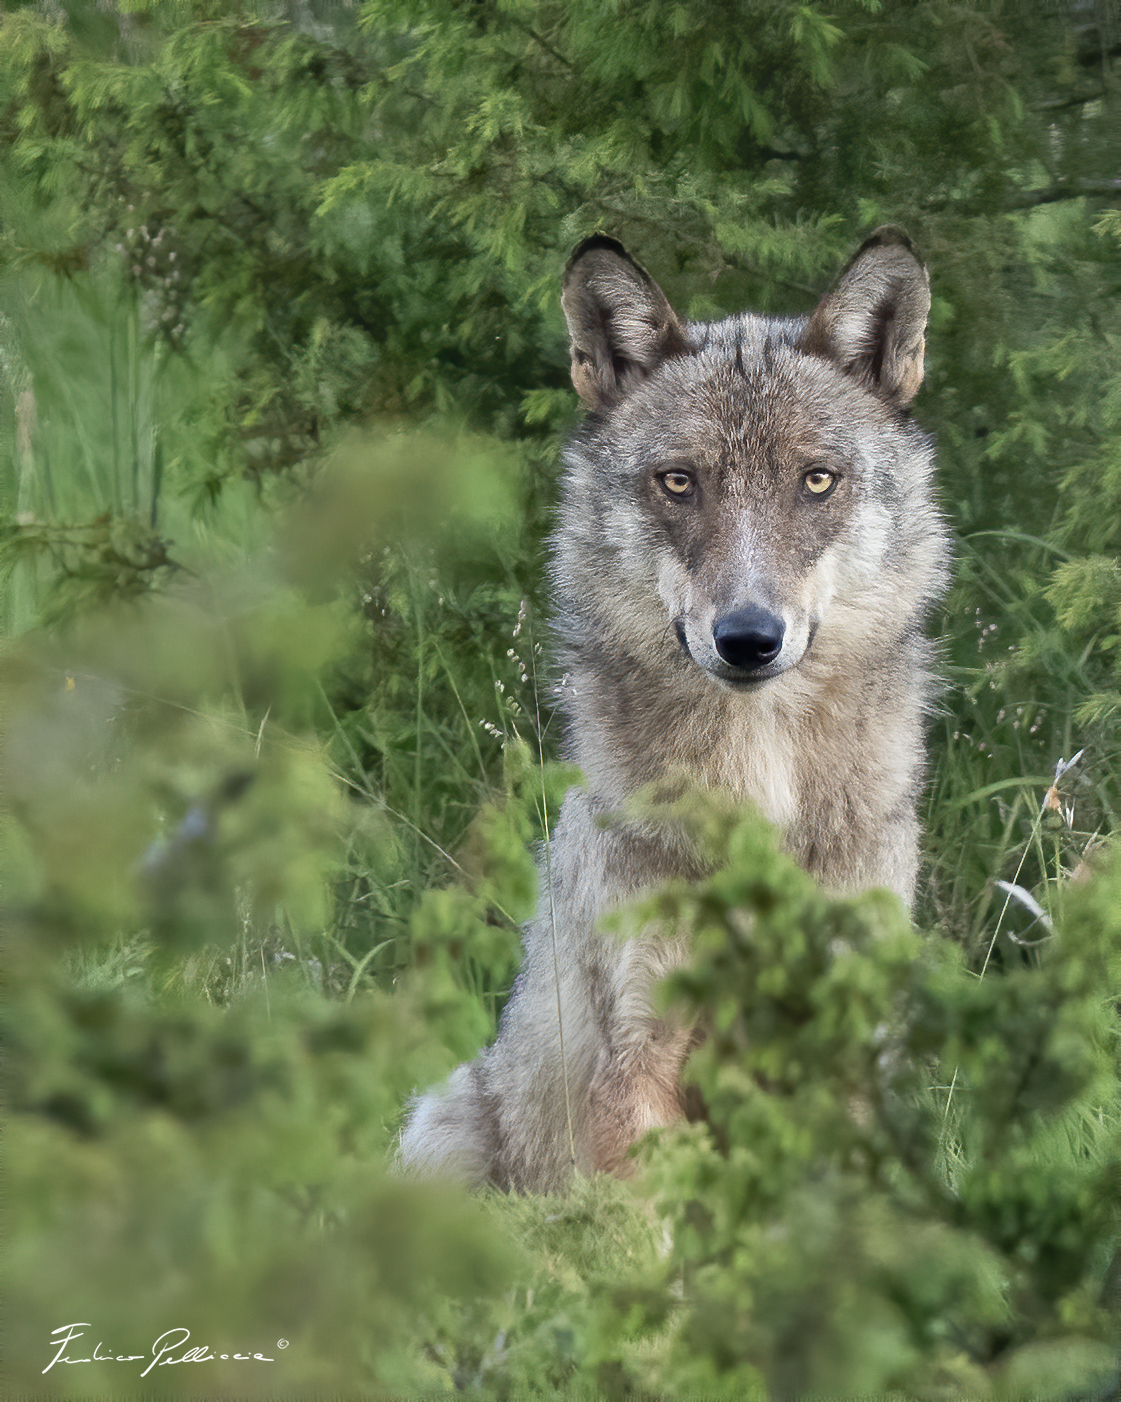 Face-to-face with the Apennine wolf ...